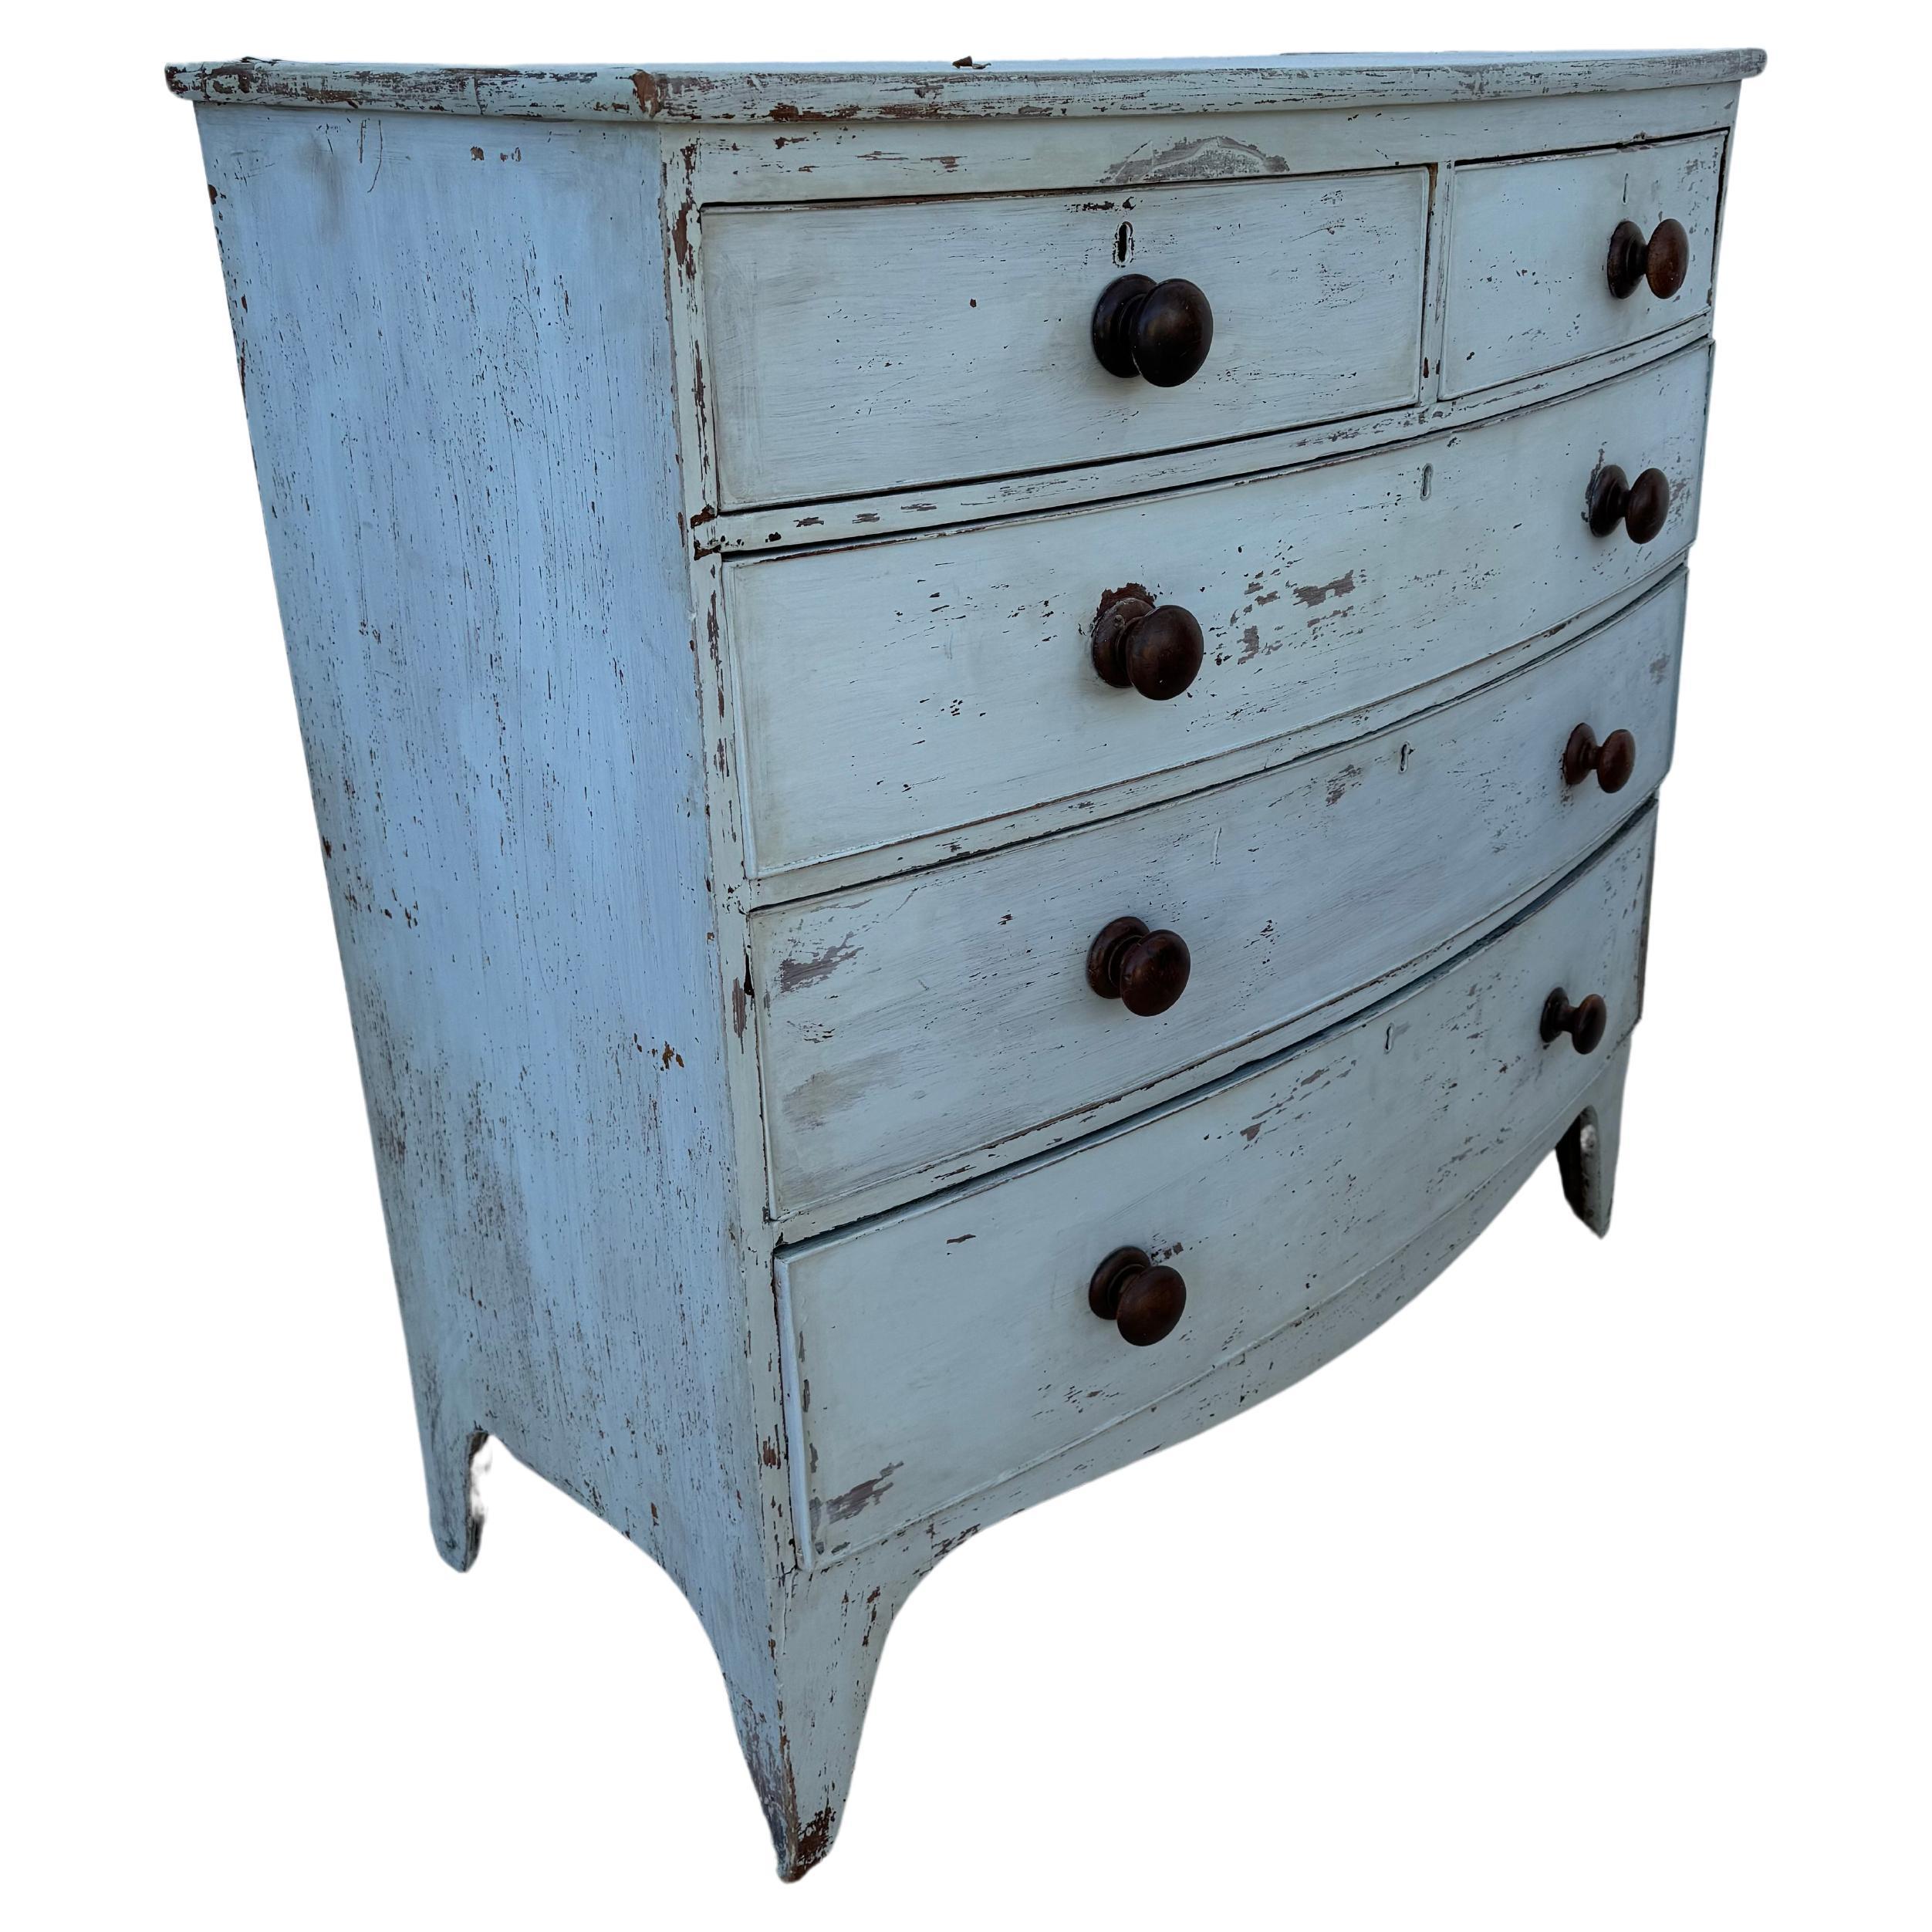 19th Century English painted bowfront chest of drawers with wooden handles. Chest features two small drawers on top of three spacious drawers. Painted light blue. Perfect chest to be used in any room of your home. Wonderful old patina.